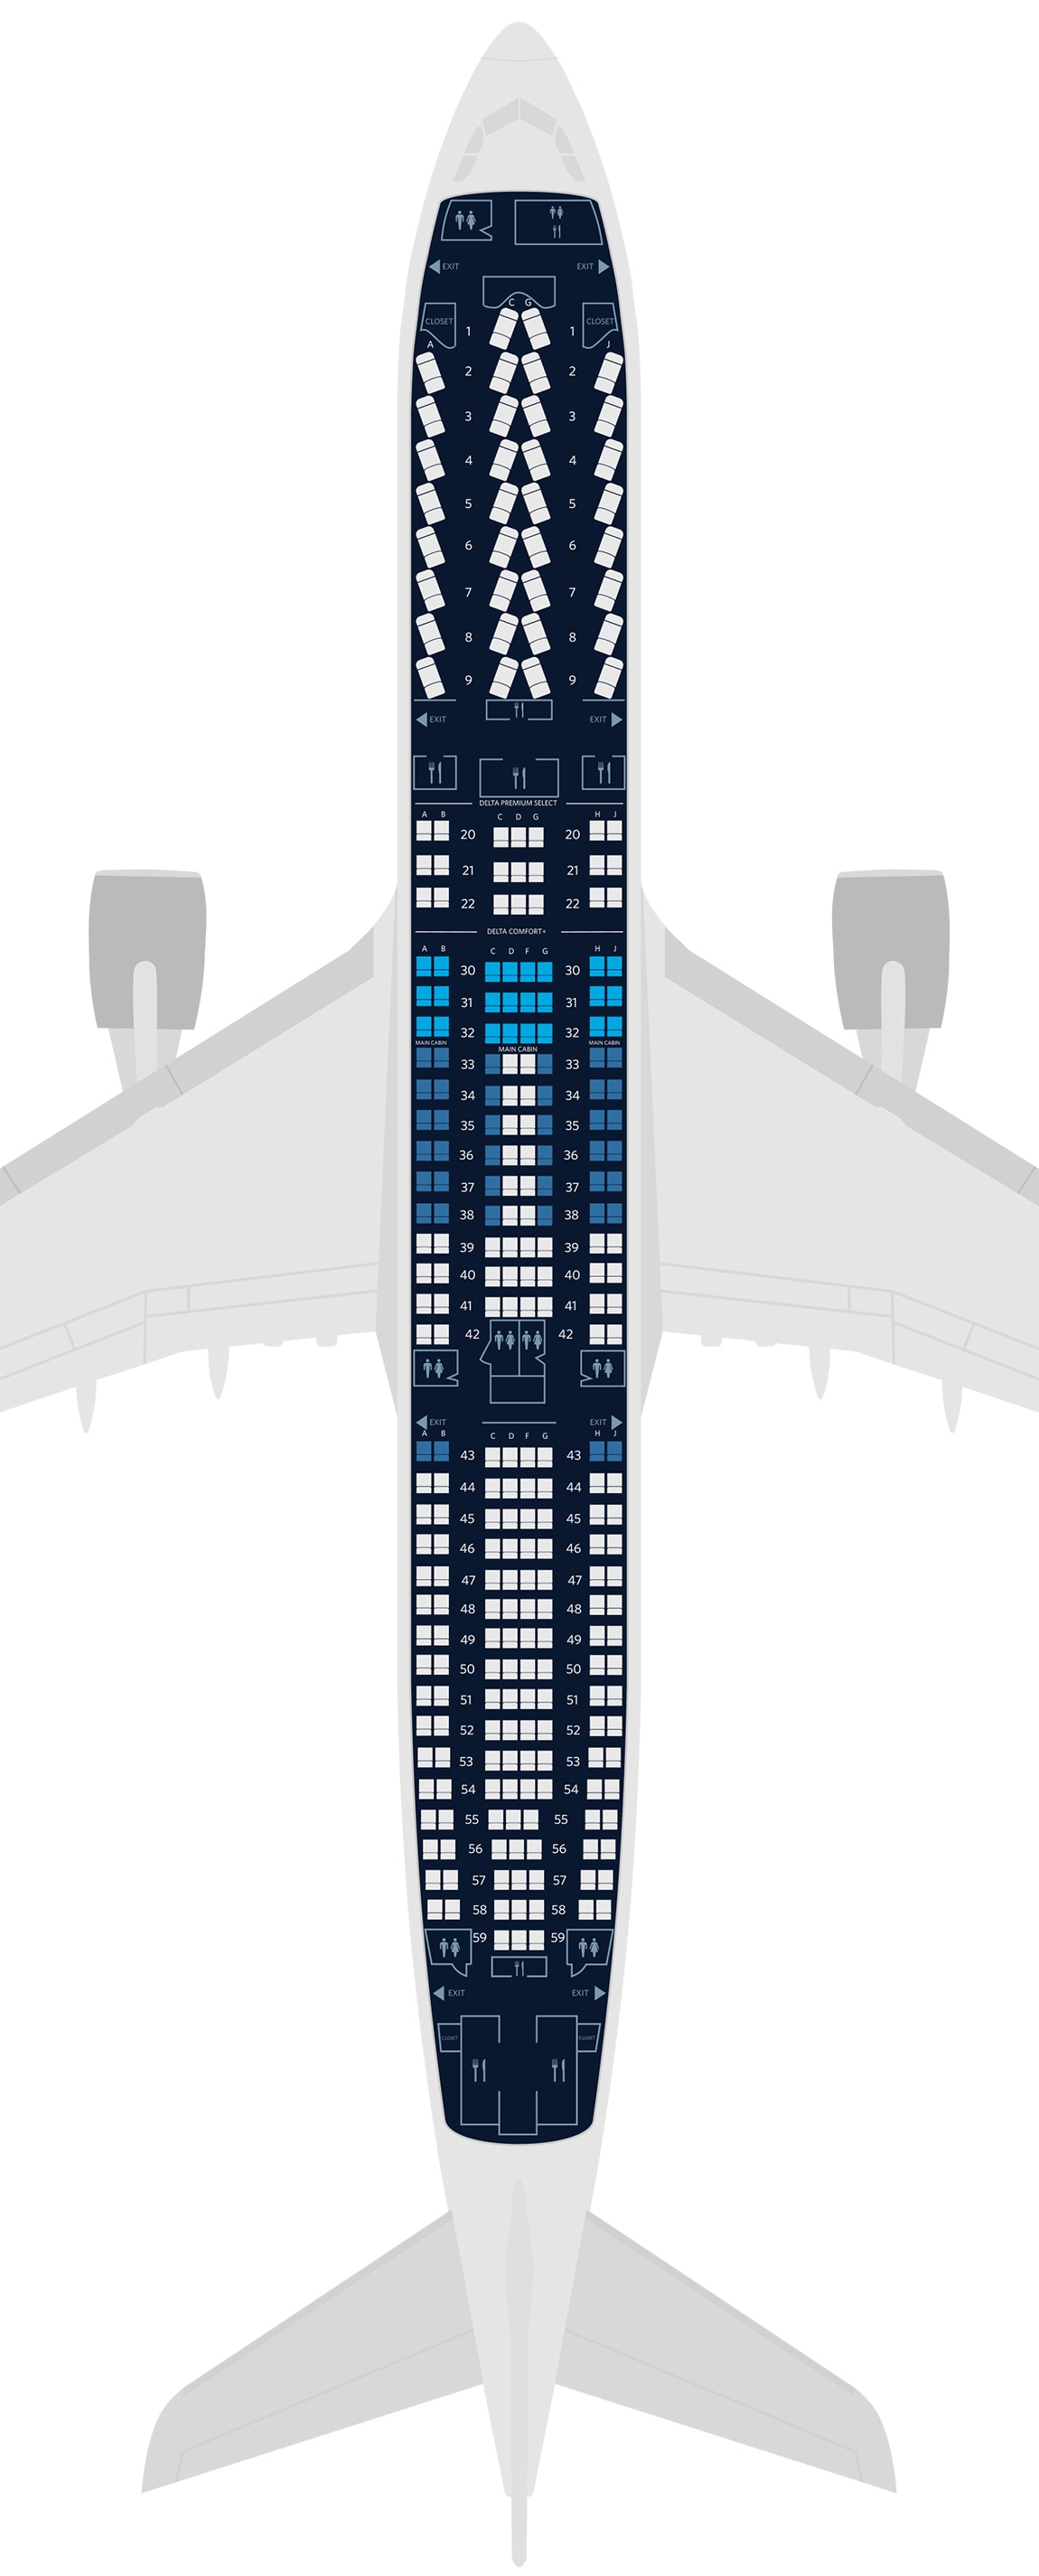 A330-300 seat map rendering